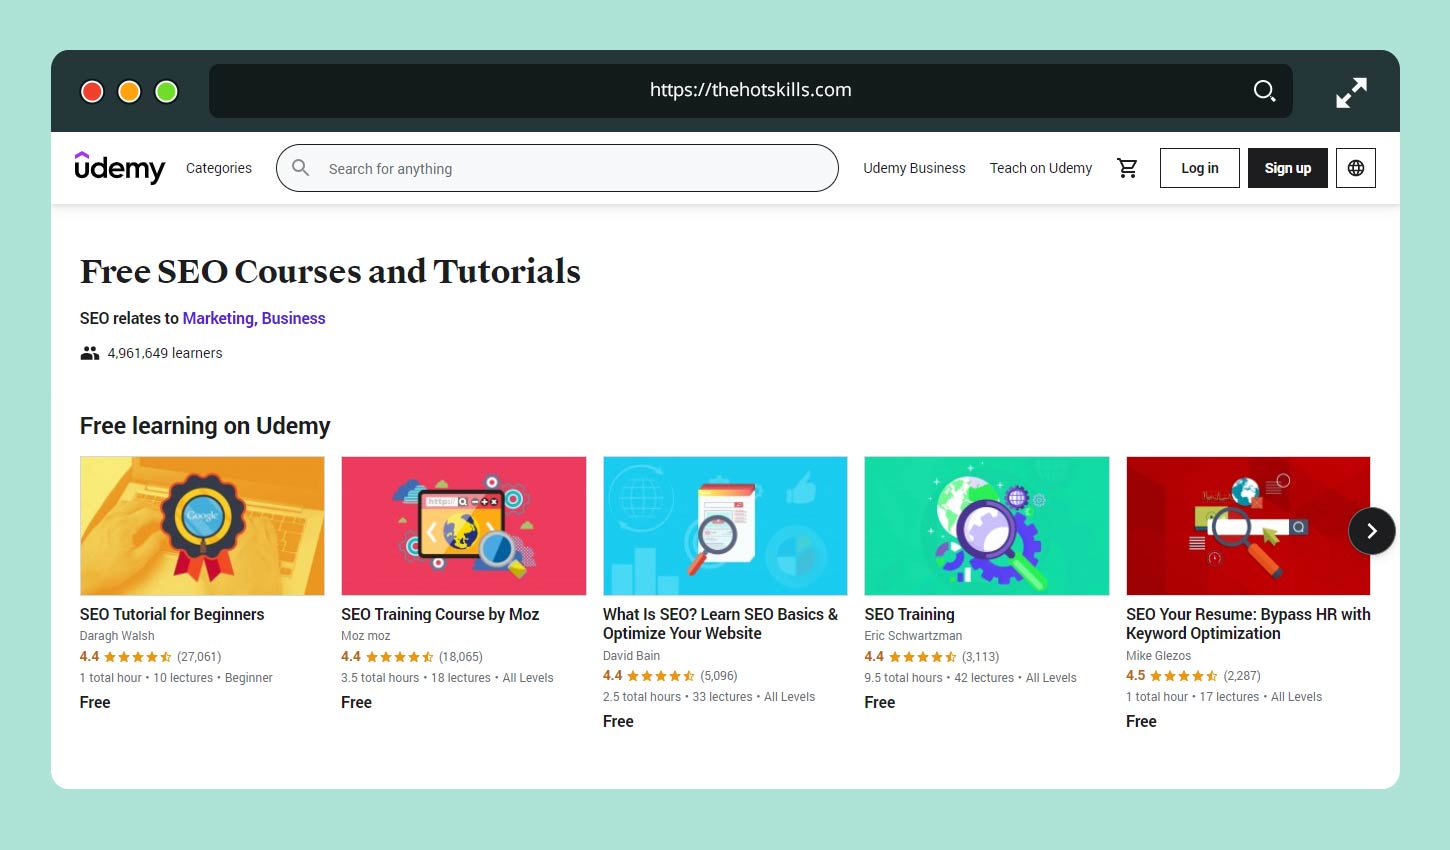 Free SEO Courses and Tutorials